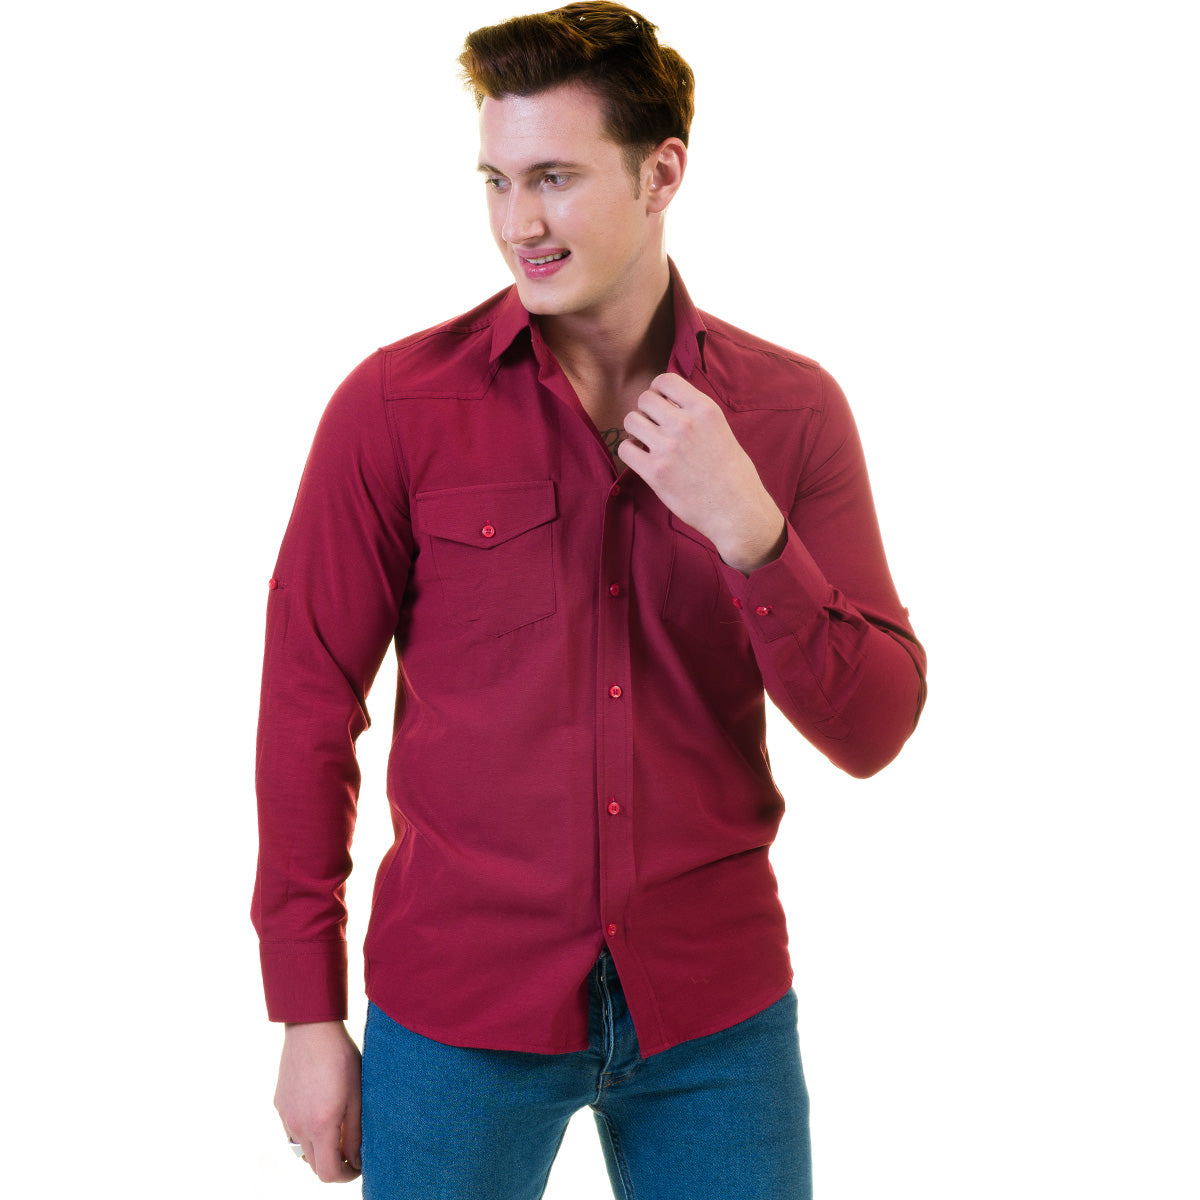 Dark Maroon Mens Slim Fit Designer Dress Shirt - tailored Cotton Shirts for Work and Casual Wear